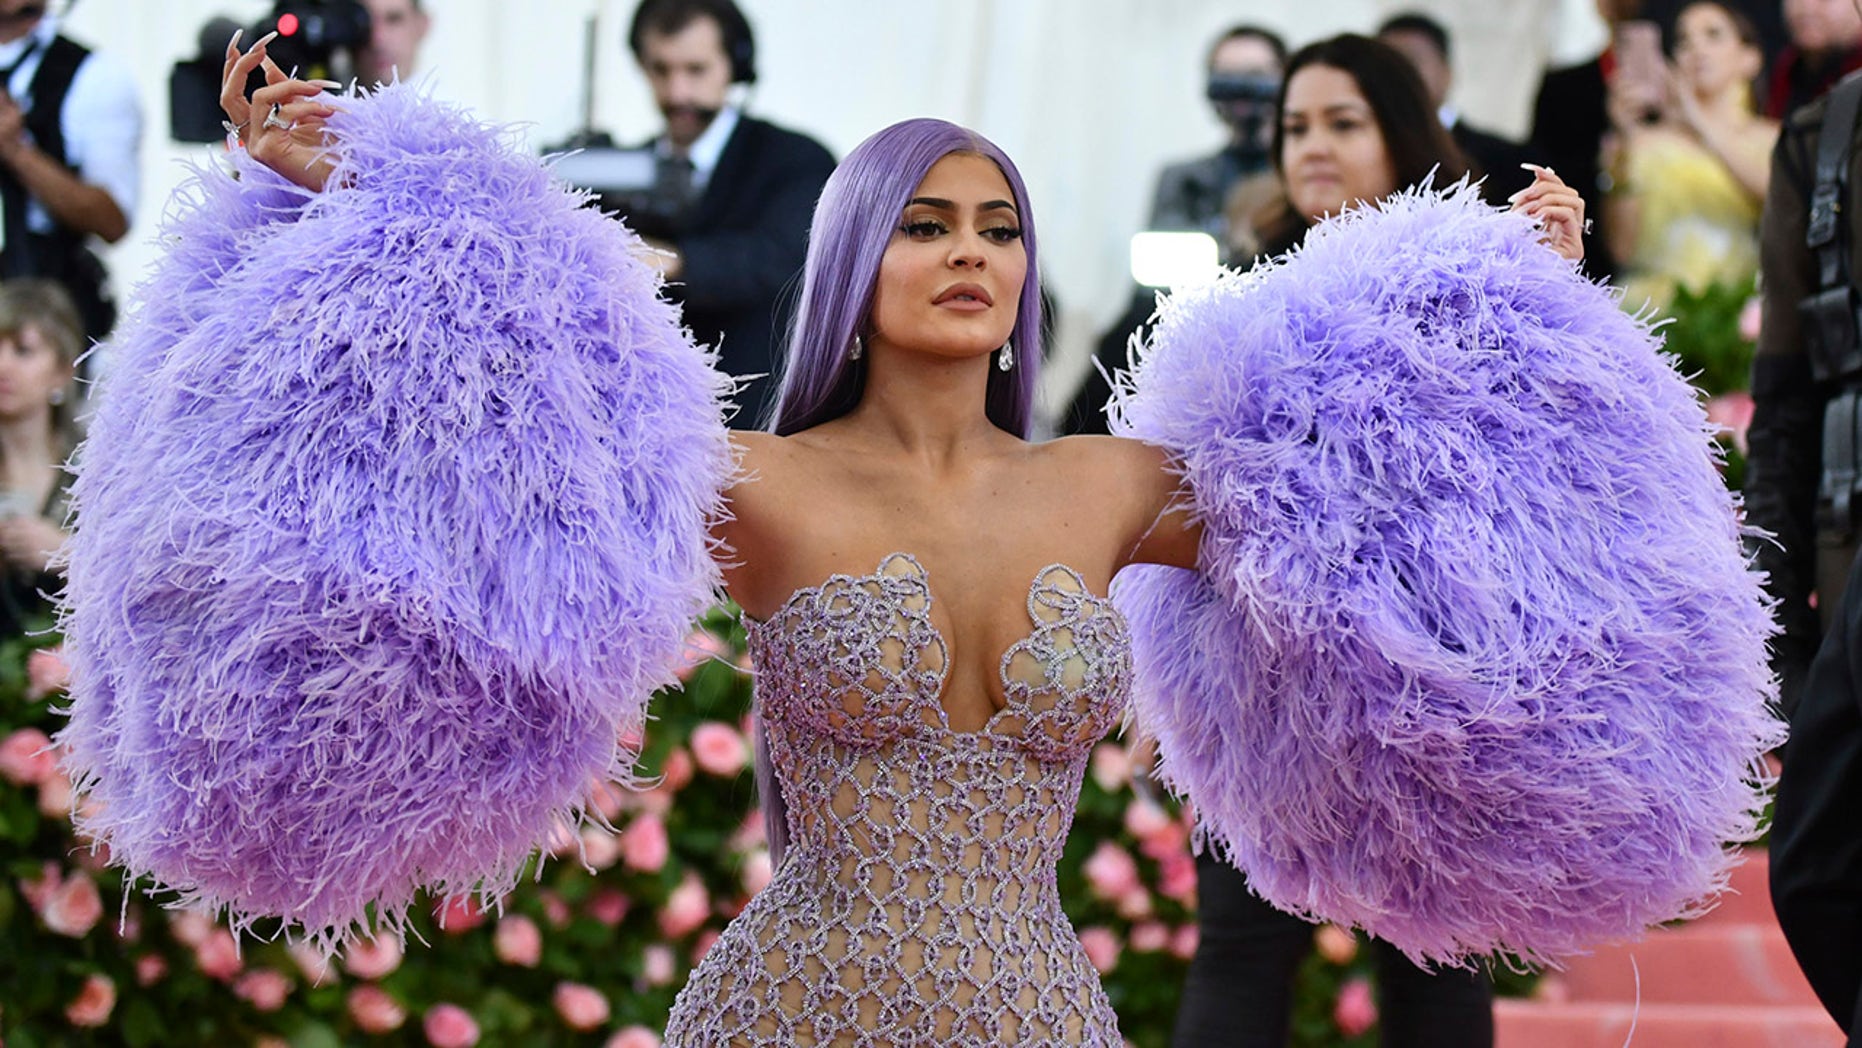 Kylie Jenner is using her influencer status to encourage her fans to vote. (Charles Sykes/Invision/AP, File)